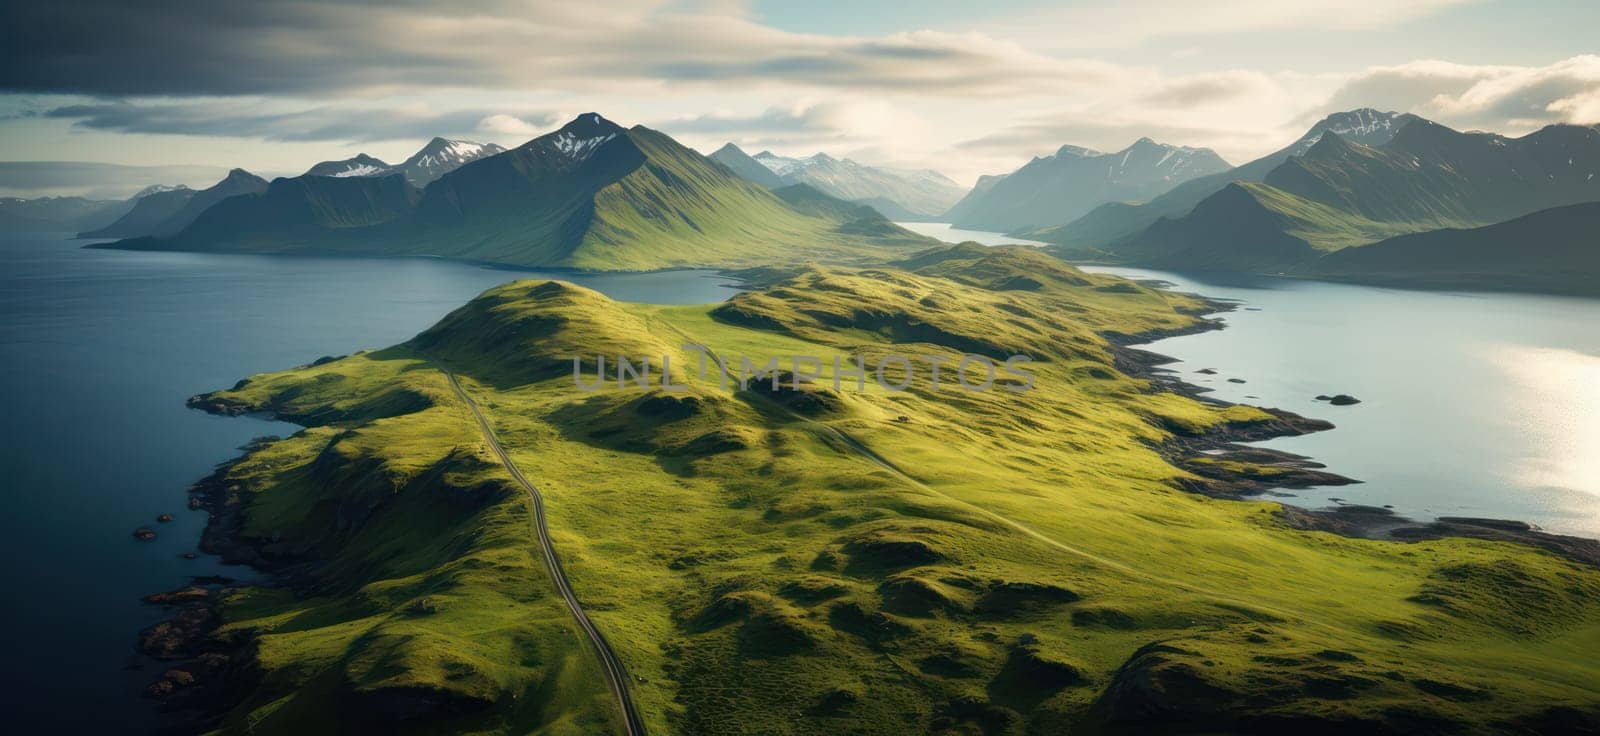 Majestic Nordic Highland: A Glorious Panorama of Green Mountains and Volcanic Scenery, Offering an Adventurous Hiking Journey in Iceland's Stunning Landmannalaugar by Vichizh